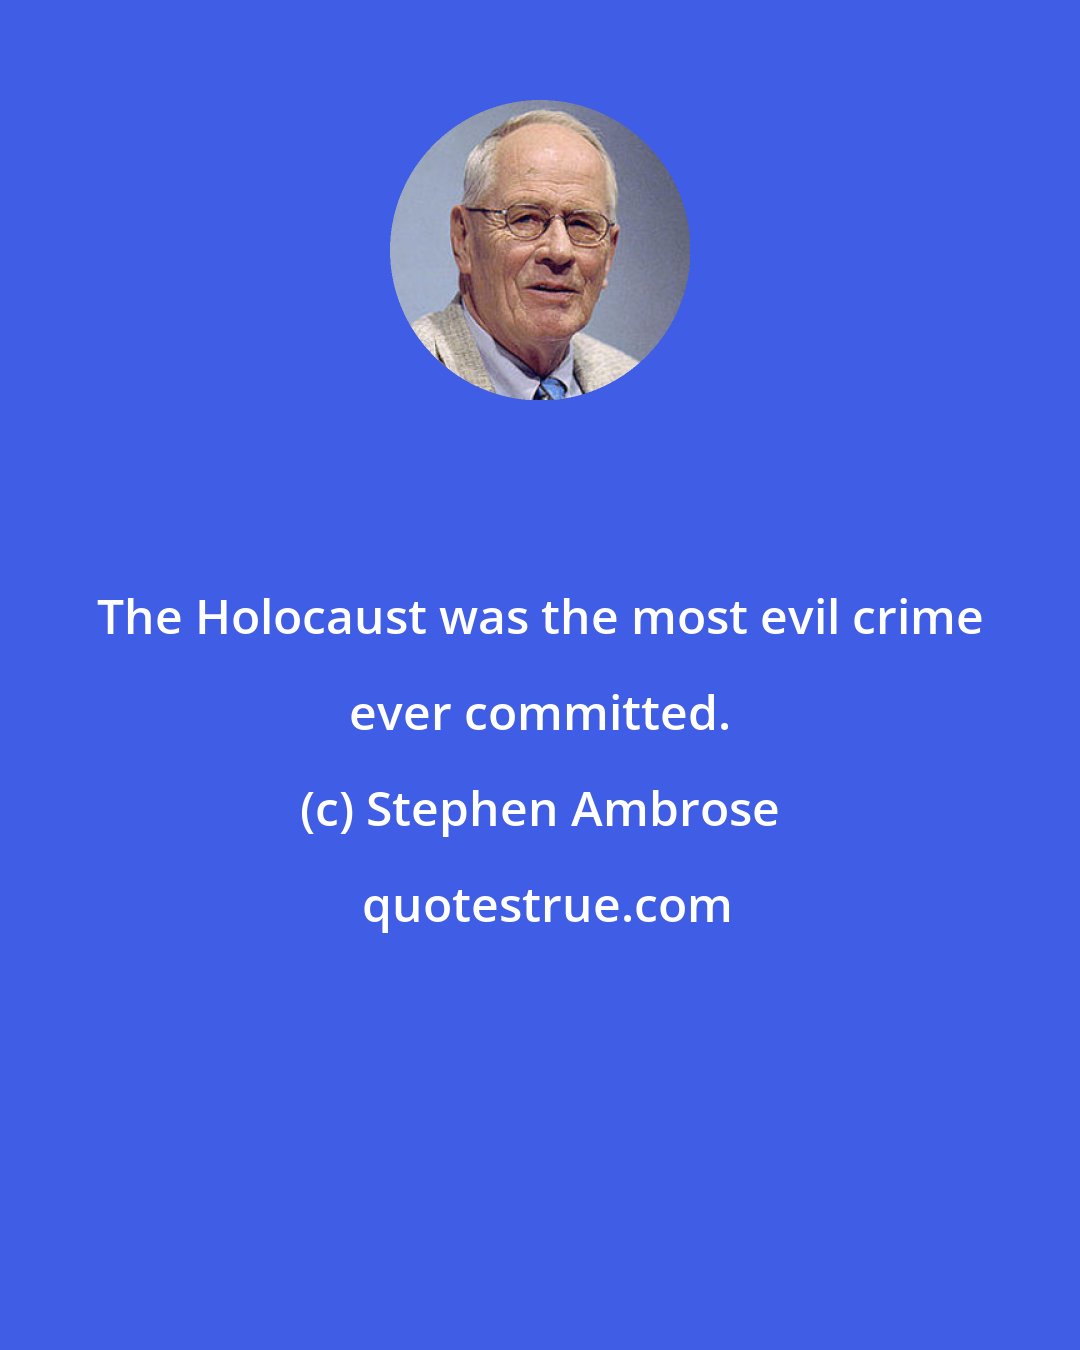 Stephen Ambrose: The Holocaust was the most evil crime ever committed.